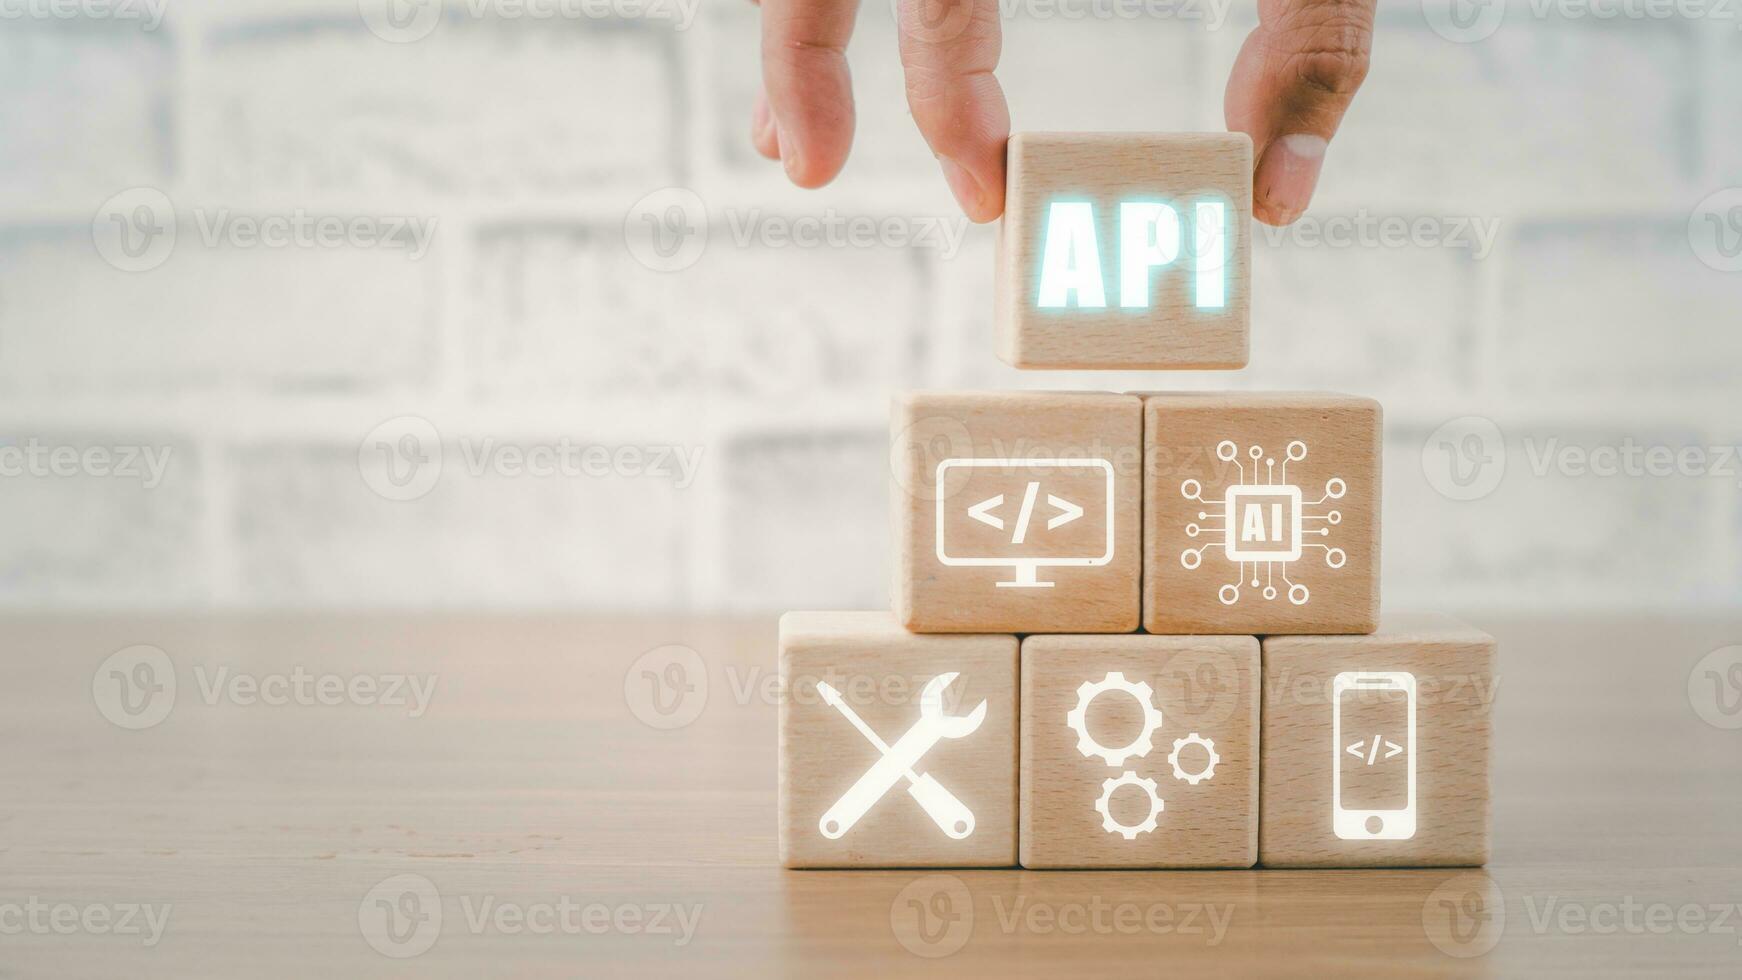 API - Application Programming Interface, Wooden block with VR screen API icon on office desk, Software development tool, modern technology, internet and networking concept. photo